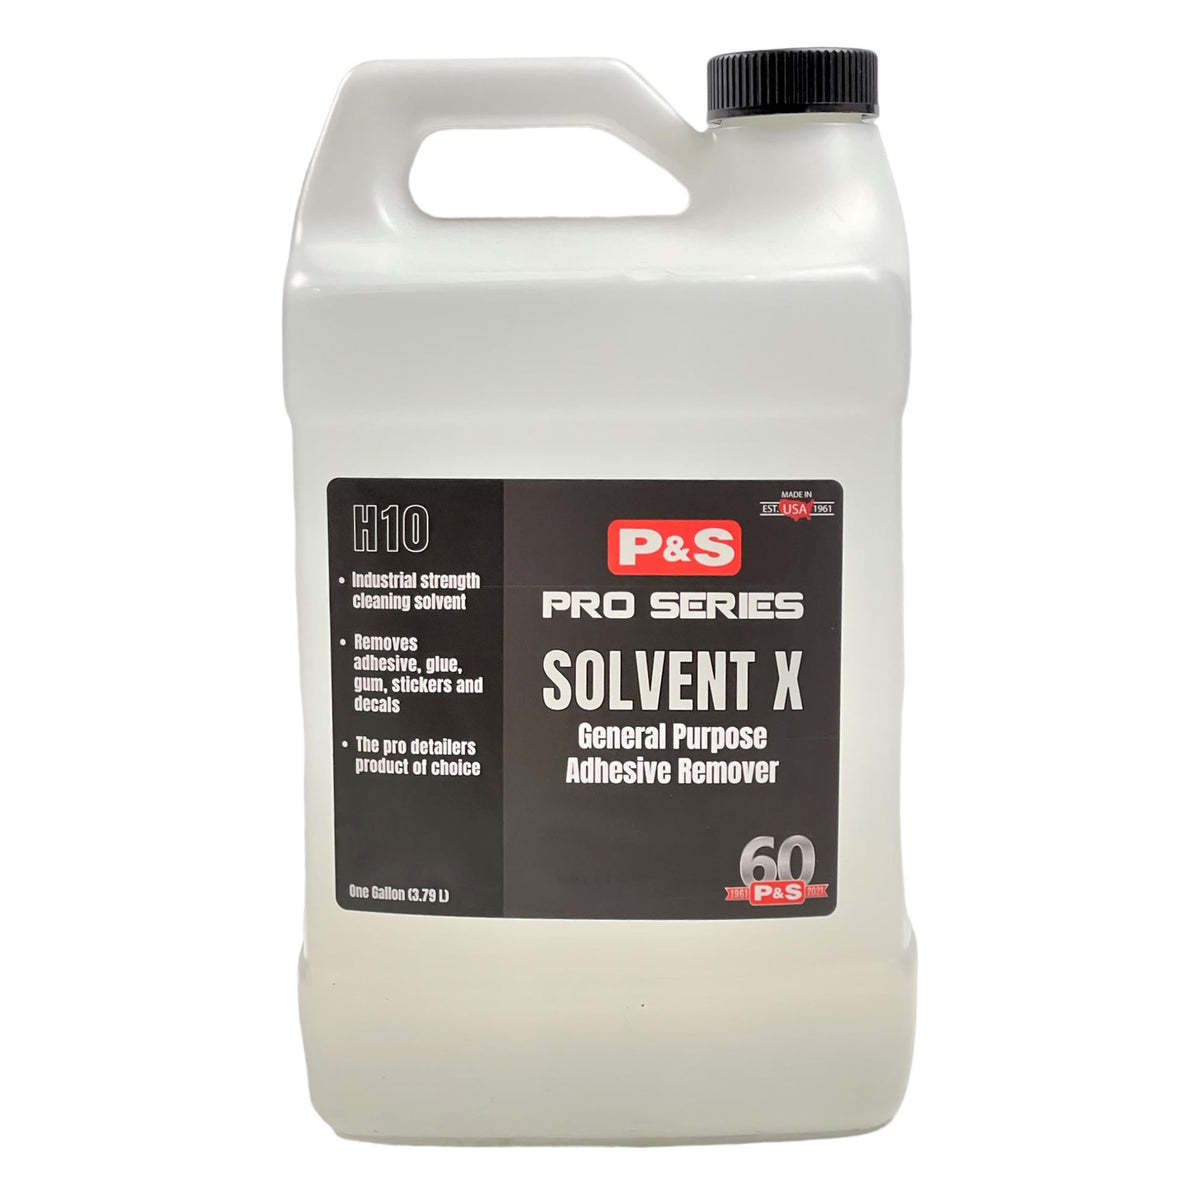 P&S Solvent X Tar, Gum, Glue Remover Solvent (In Store Pickup Only) —  Detailers Choice Car Care